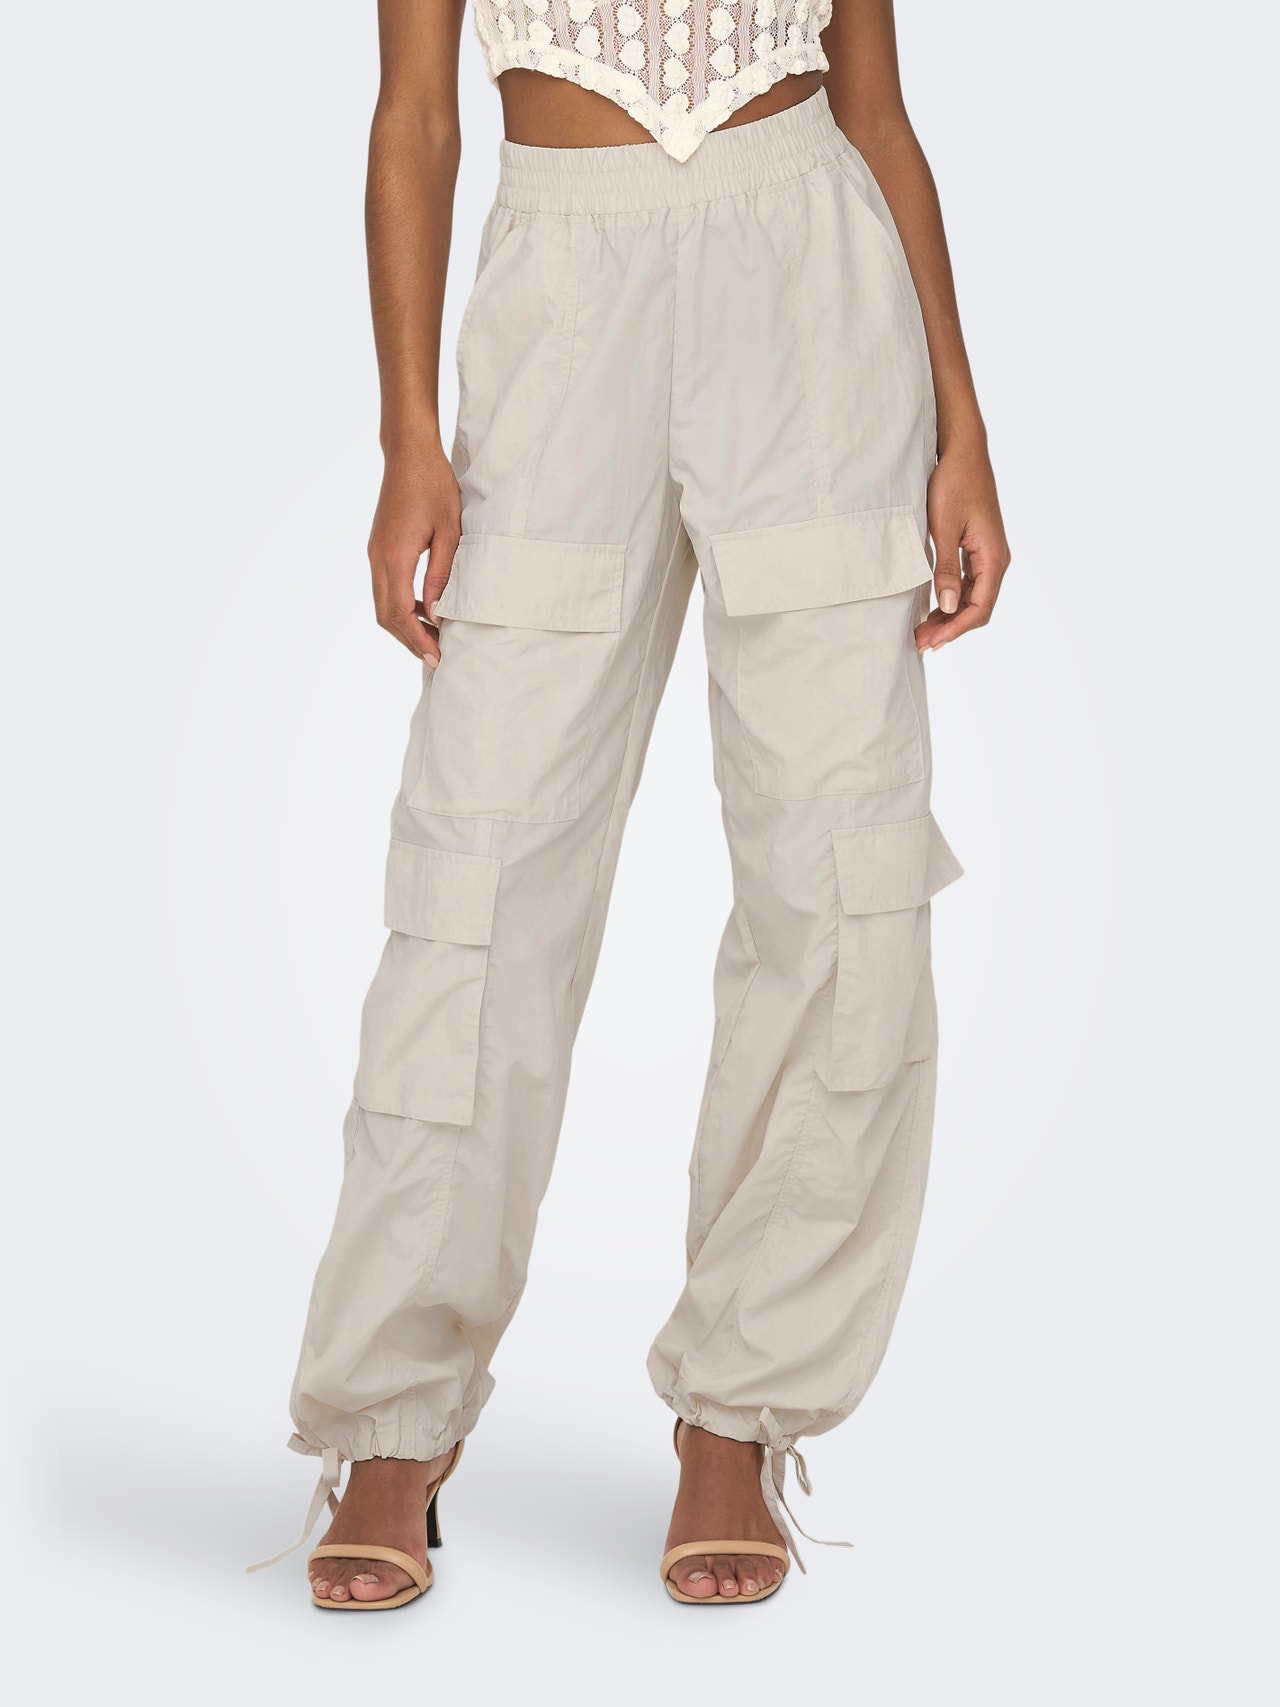 ONLY Mid waist CARGO PARACHUTE PANT -Pumice Stone - 15302732